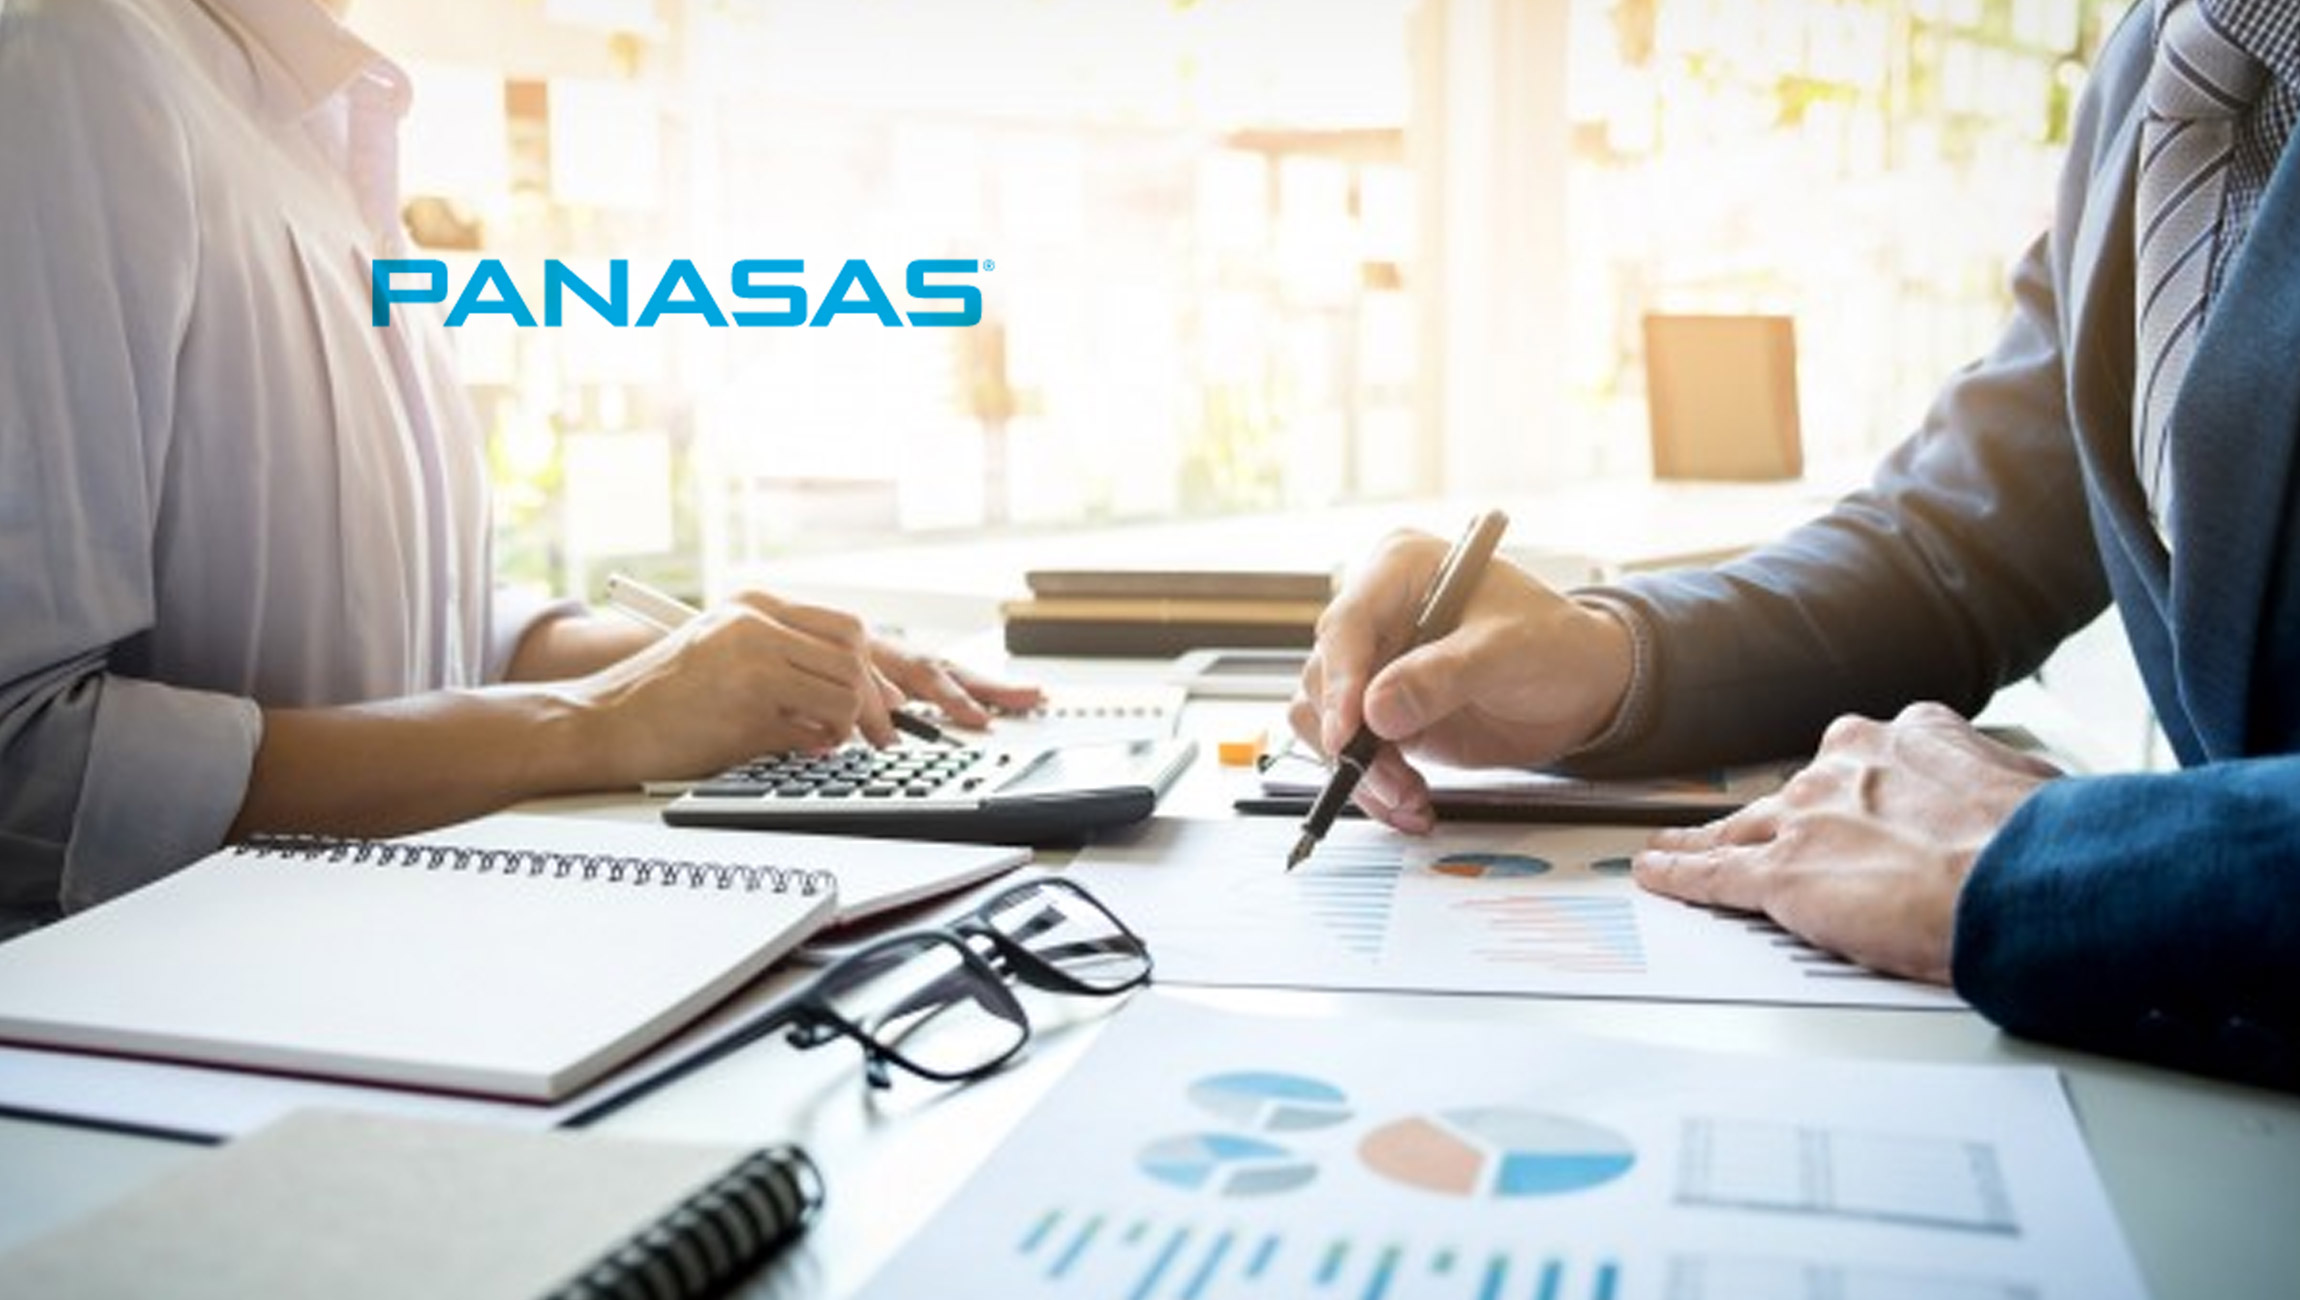 Panasas Introduces Advanced Data Insight and Data Movement Suite for HPC and AI/ML Environments 1